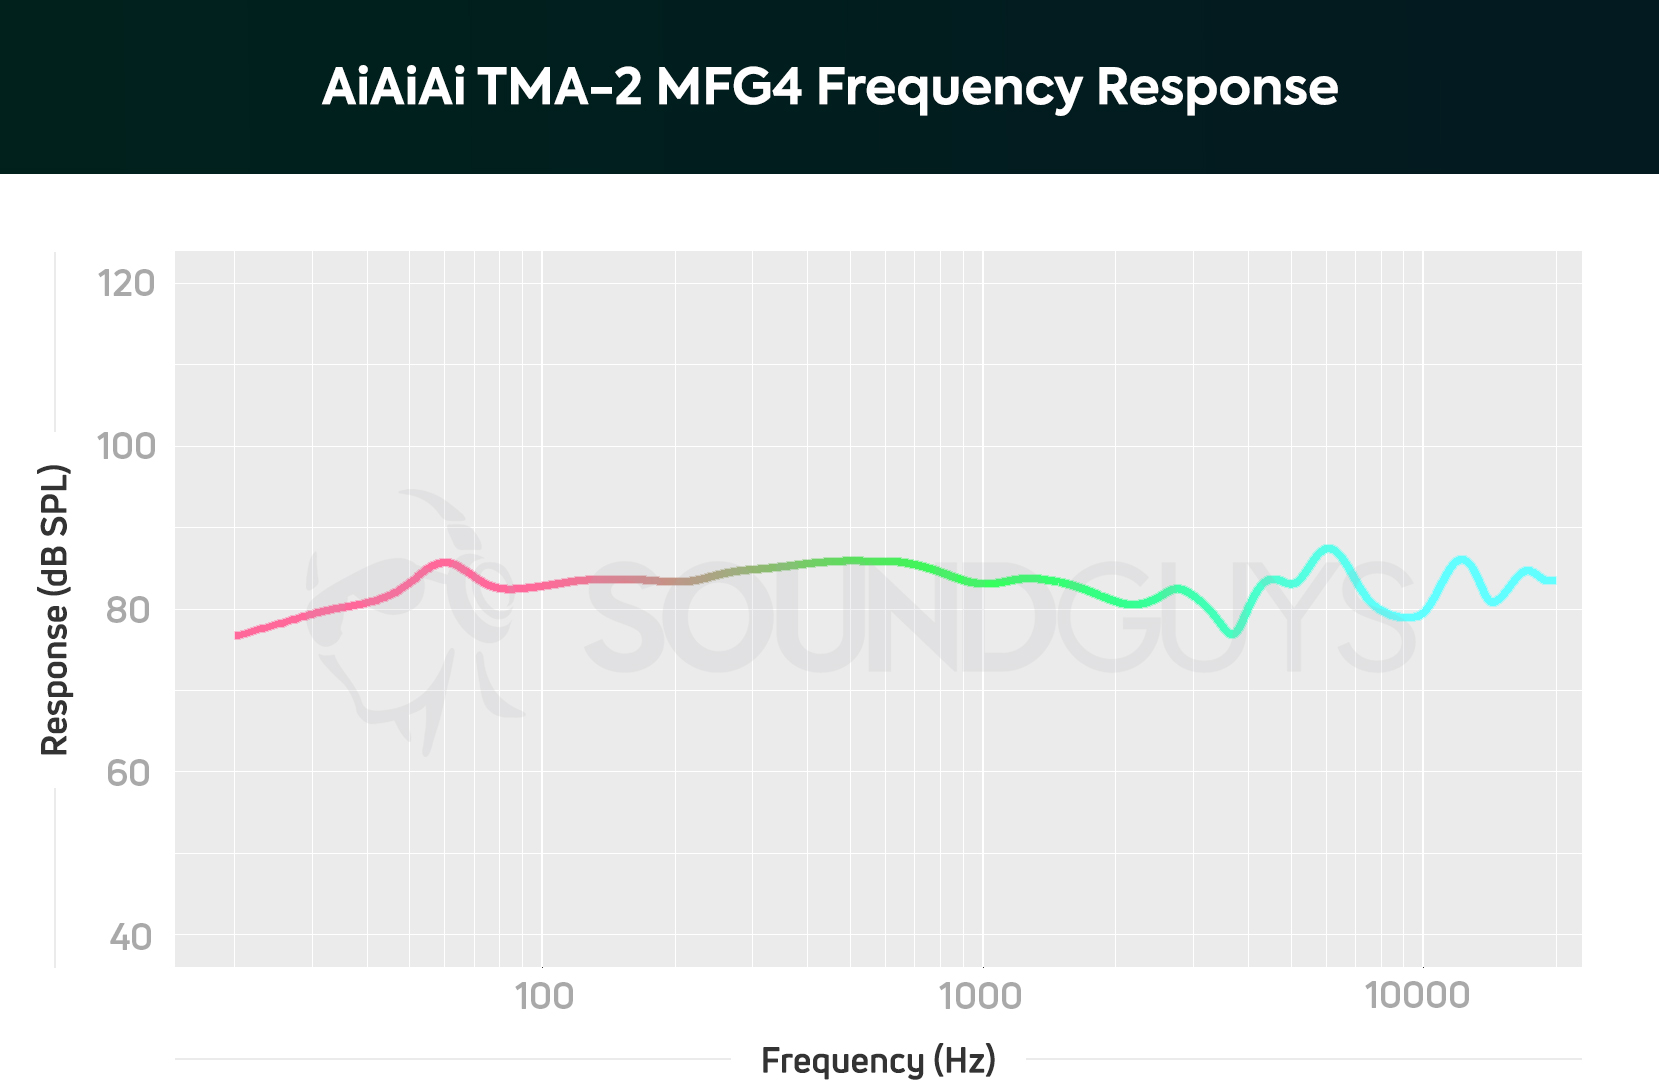 A chart showing the performance of the AIAIAI TMA-2 MFG4.